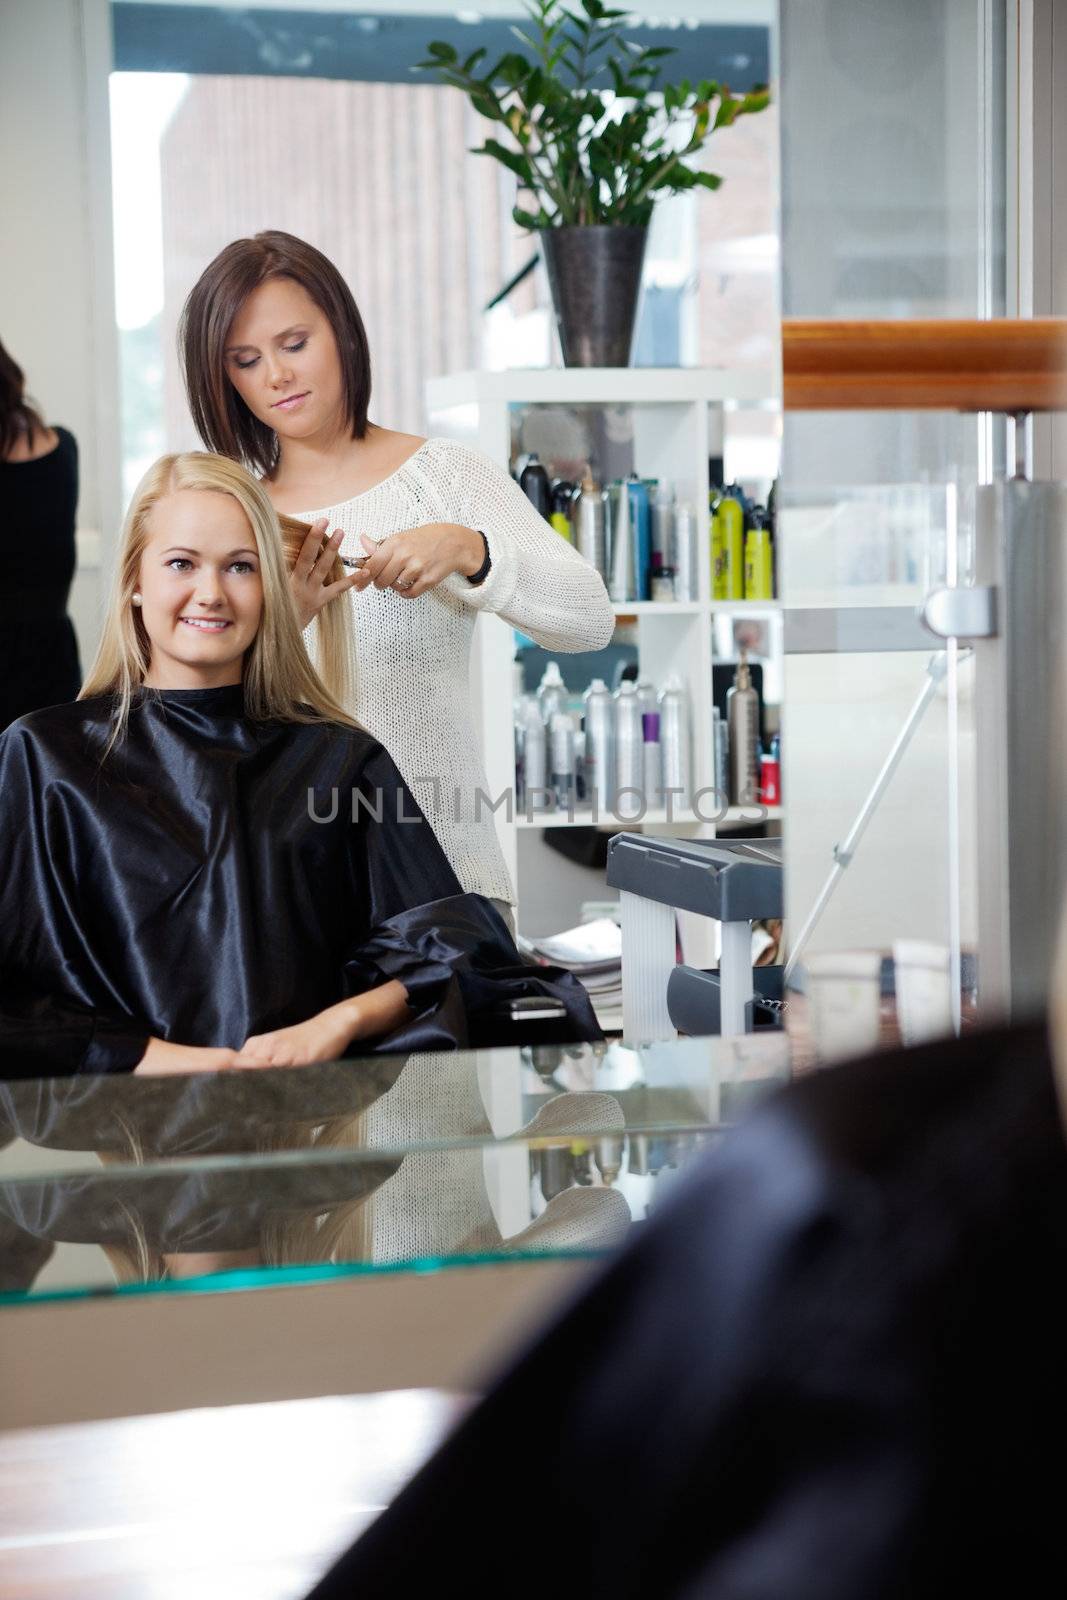 Mirror reflection of hairdresser giving young woman a new haircut at parlor